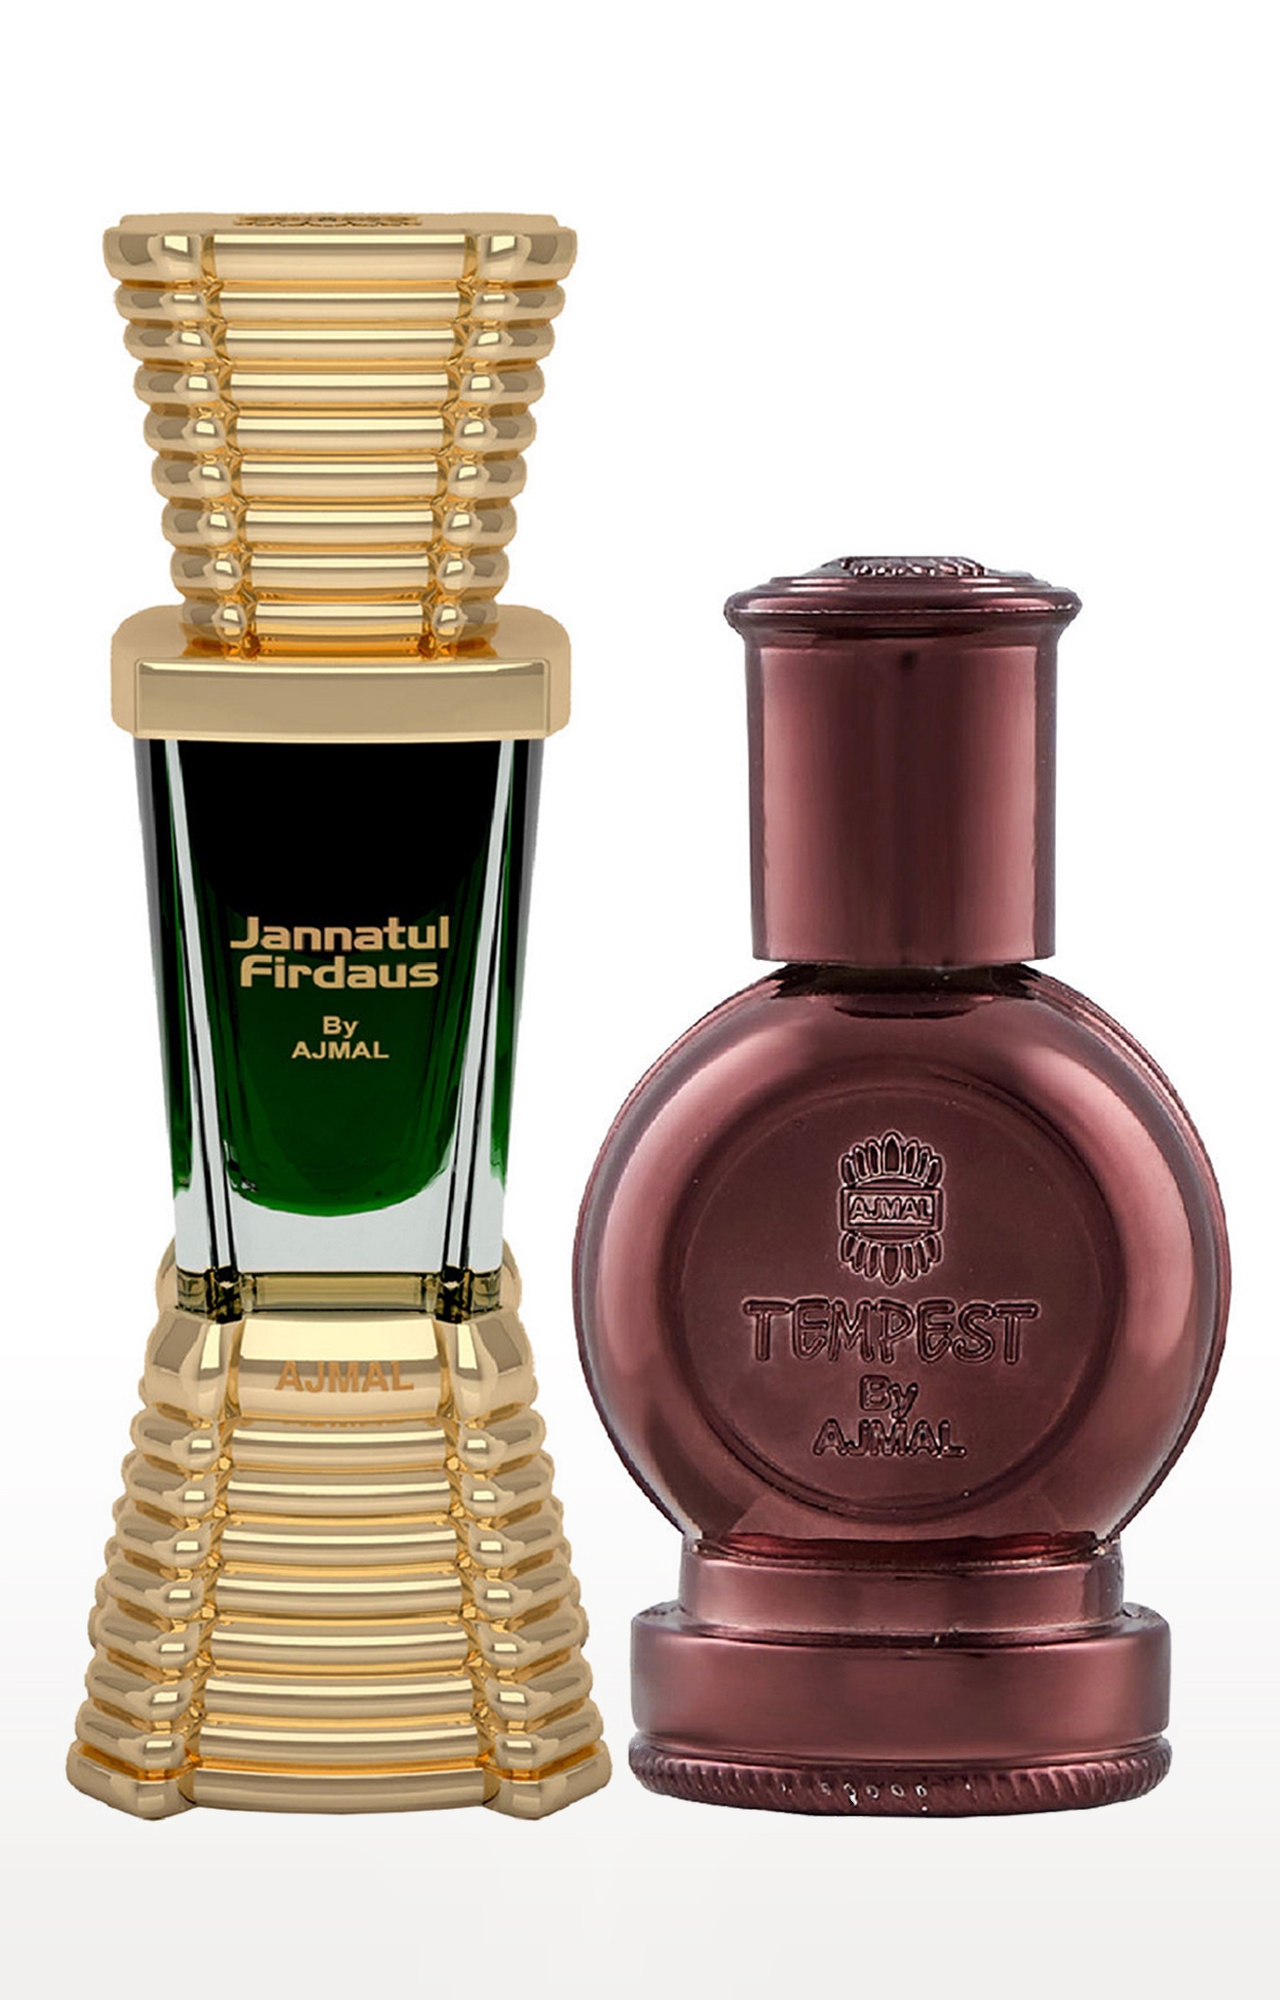 Ajmal Jannatul Firdaus Concentrated Perfume Oil Oriental Alcohol-free Attar 10ml for Unisex and Tempest Concentrated Perfume Oil Alcohol-free Attar 12ml for Unisex